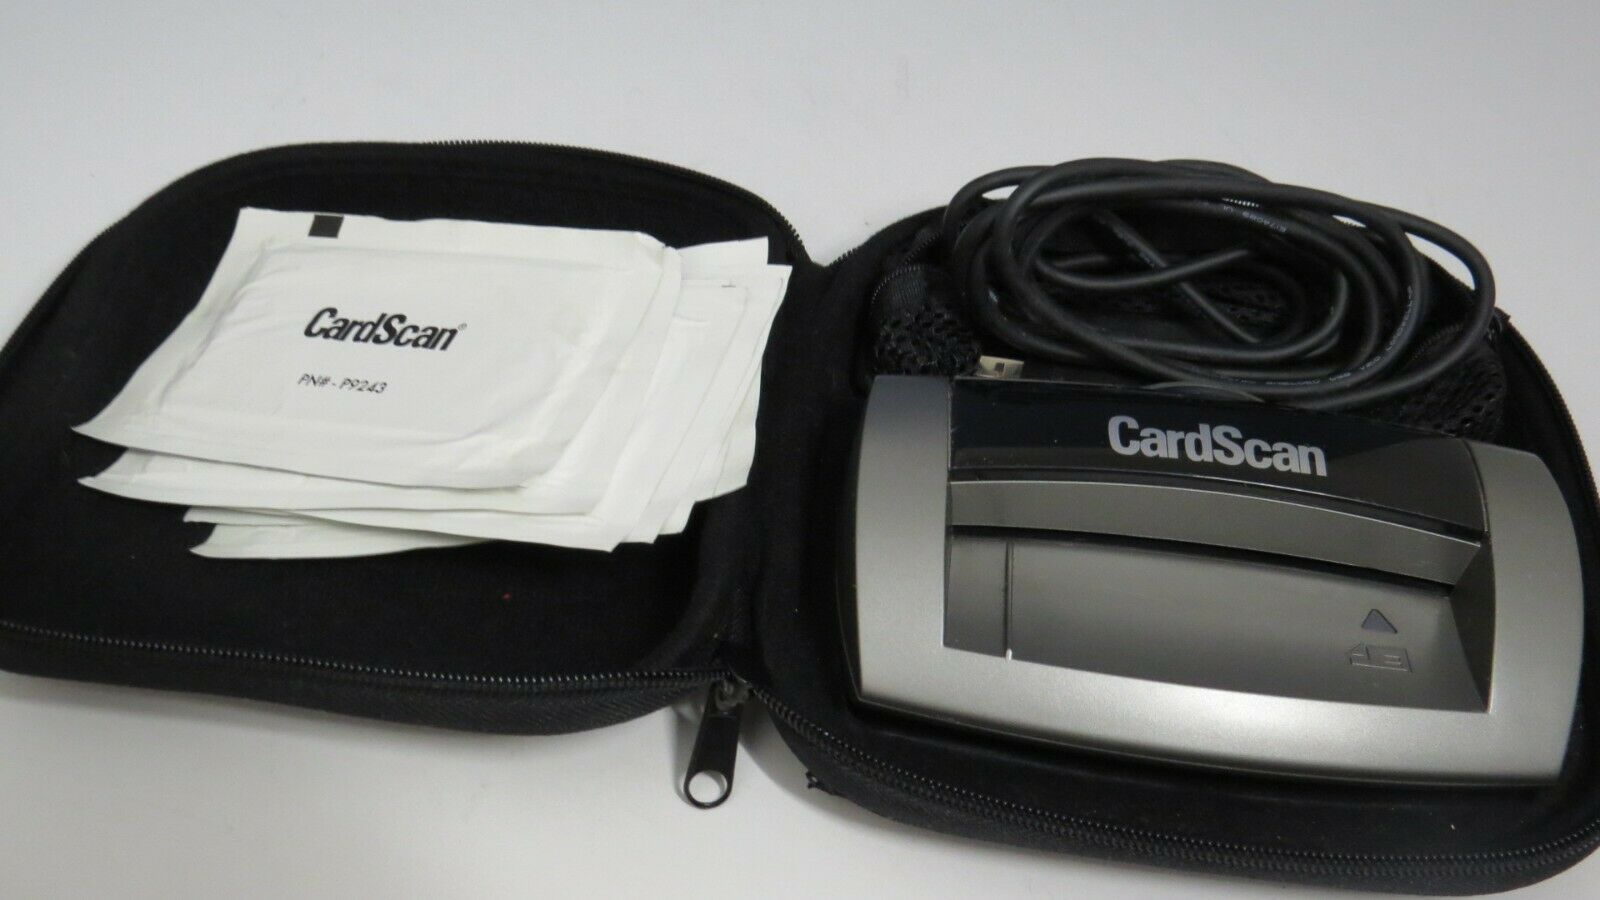 Cardscan 700C Card Scanner by COREX (no software) + 8 Cleaning pads Tested USB - $17.99